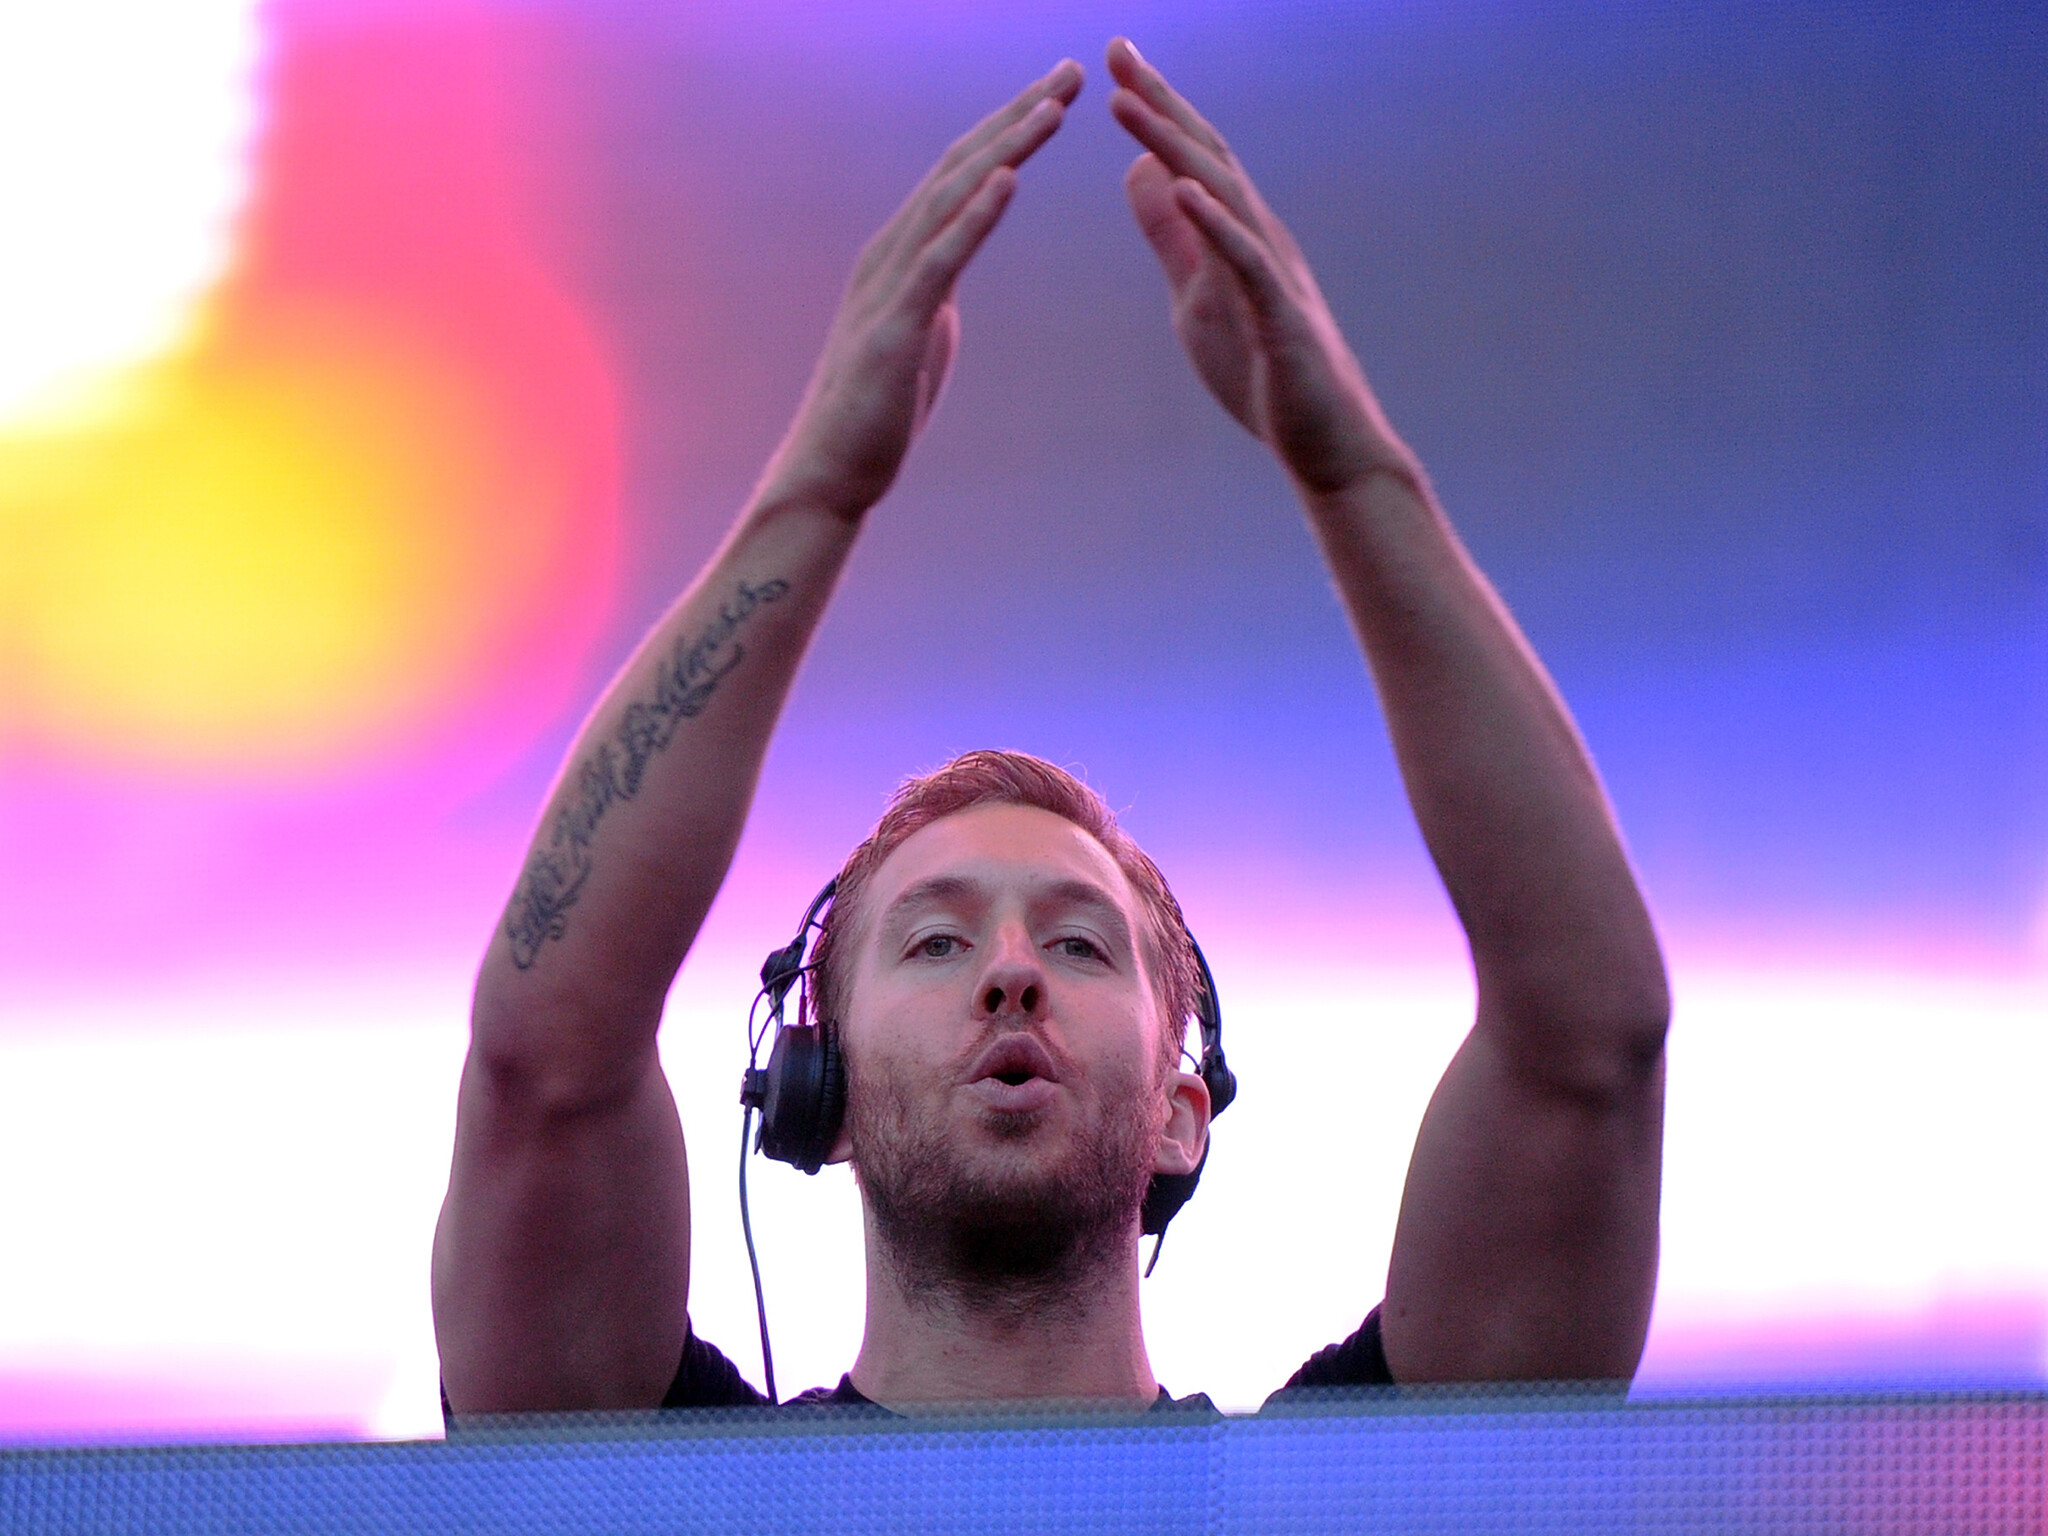 HD wallpaper, Wallpapers Posted By Fans, Calvin Harris, Creative Designs, Fan Inspired Artwork, 2050X1540 Hd Desktop, Desktop Hd Calvin Harris Background